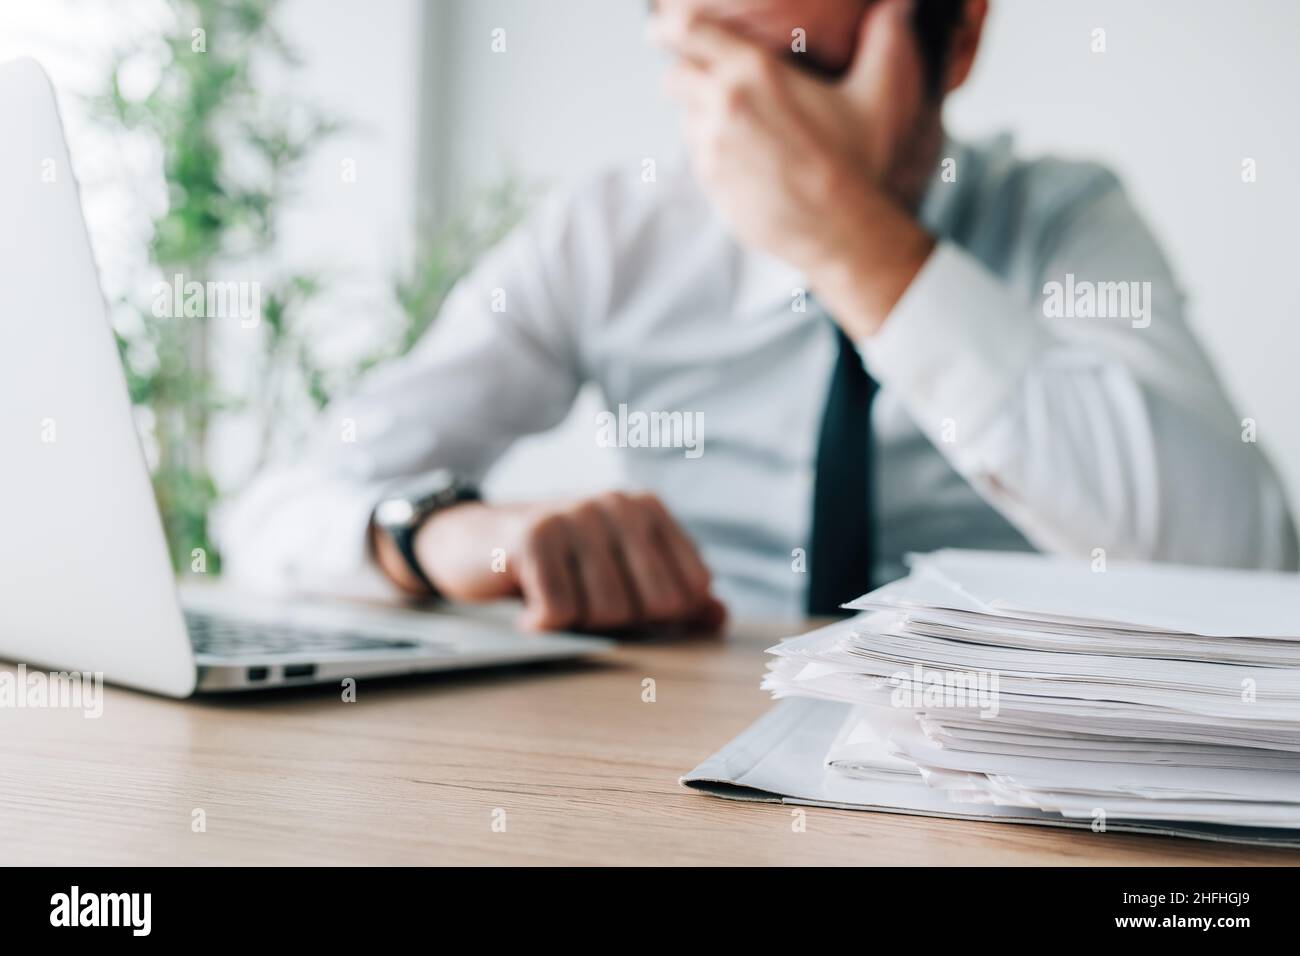 Career failure, disappointed businessman covering face in office while sitting at the desk, selective focus Stock Photo